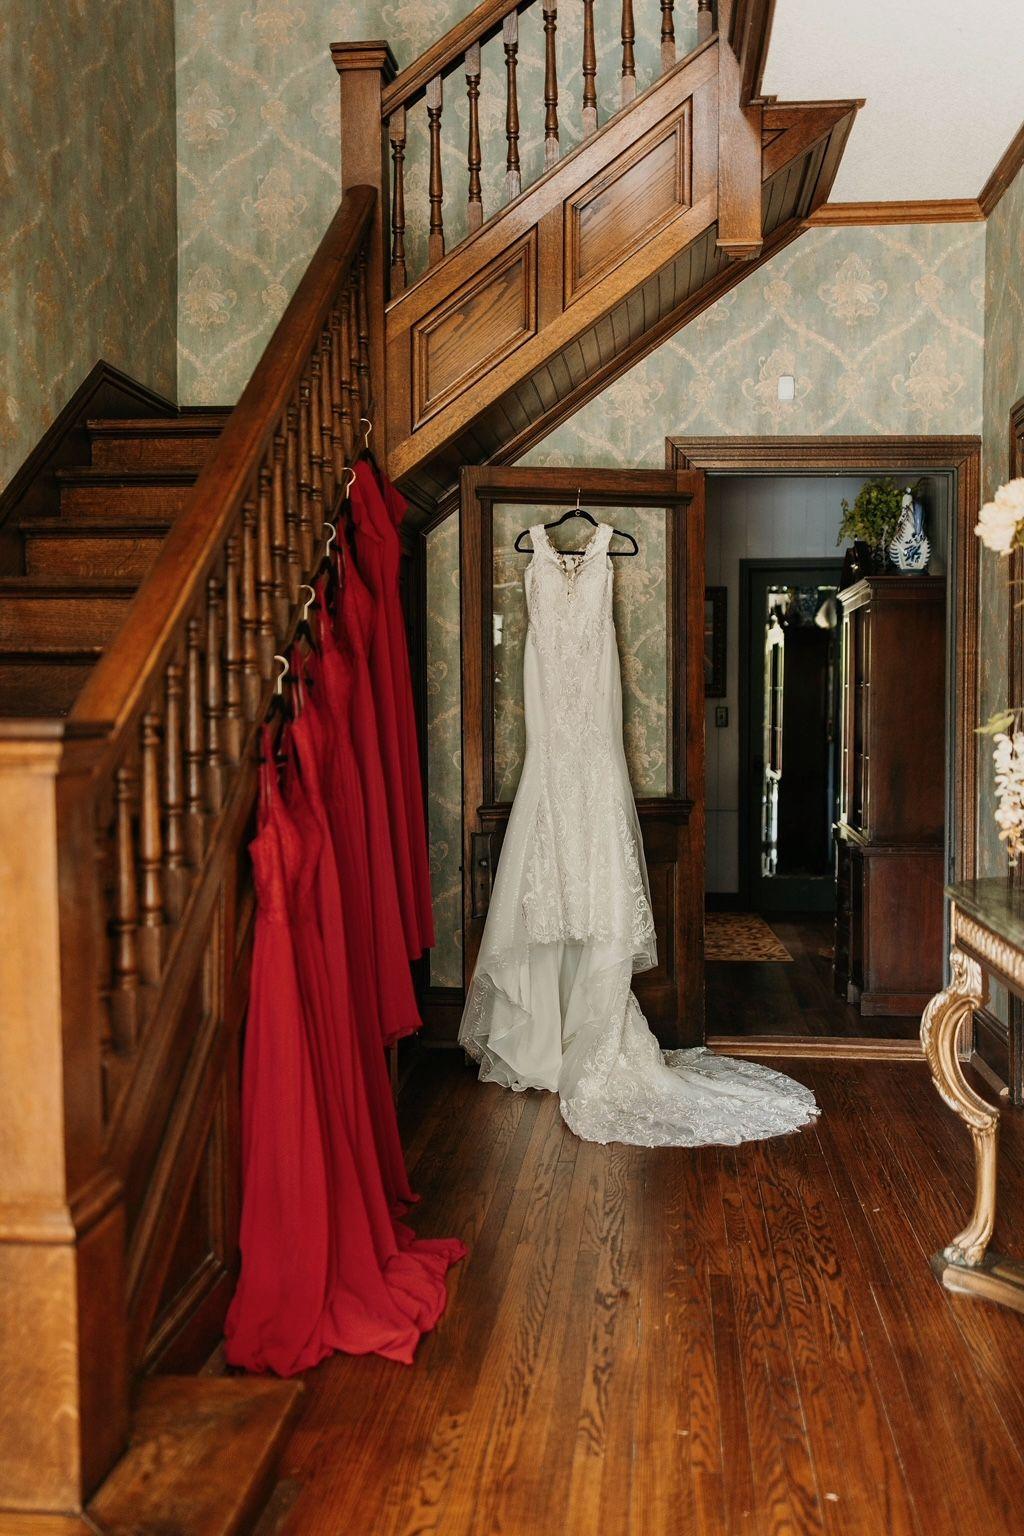 Photo of bridesmaids dresses and bride's dress hanging down the historic wood staircase of the Hayes House